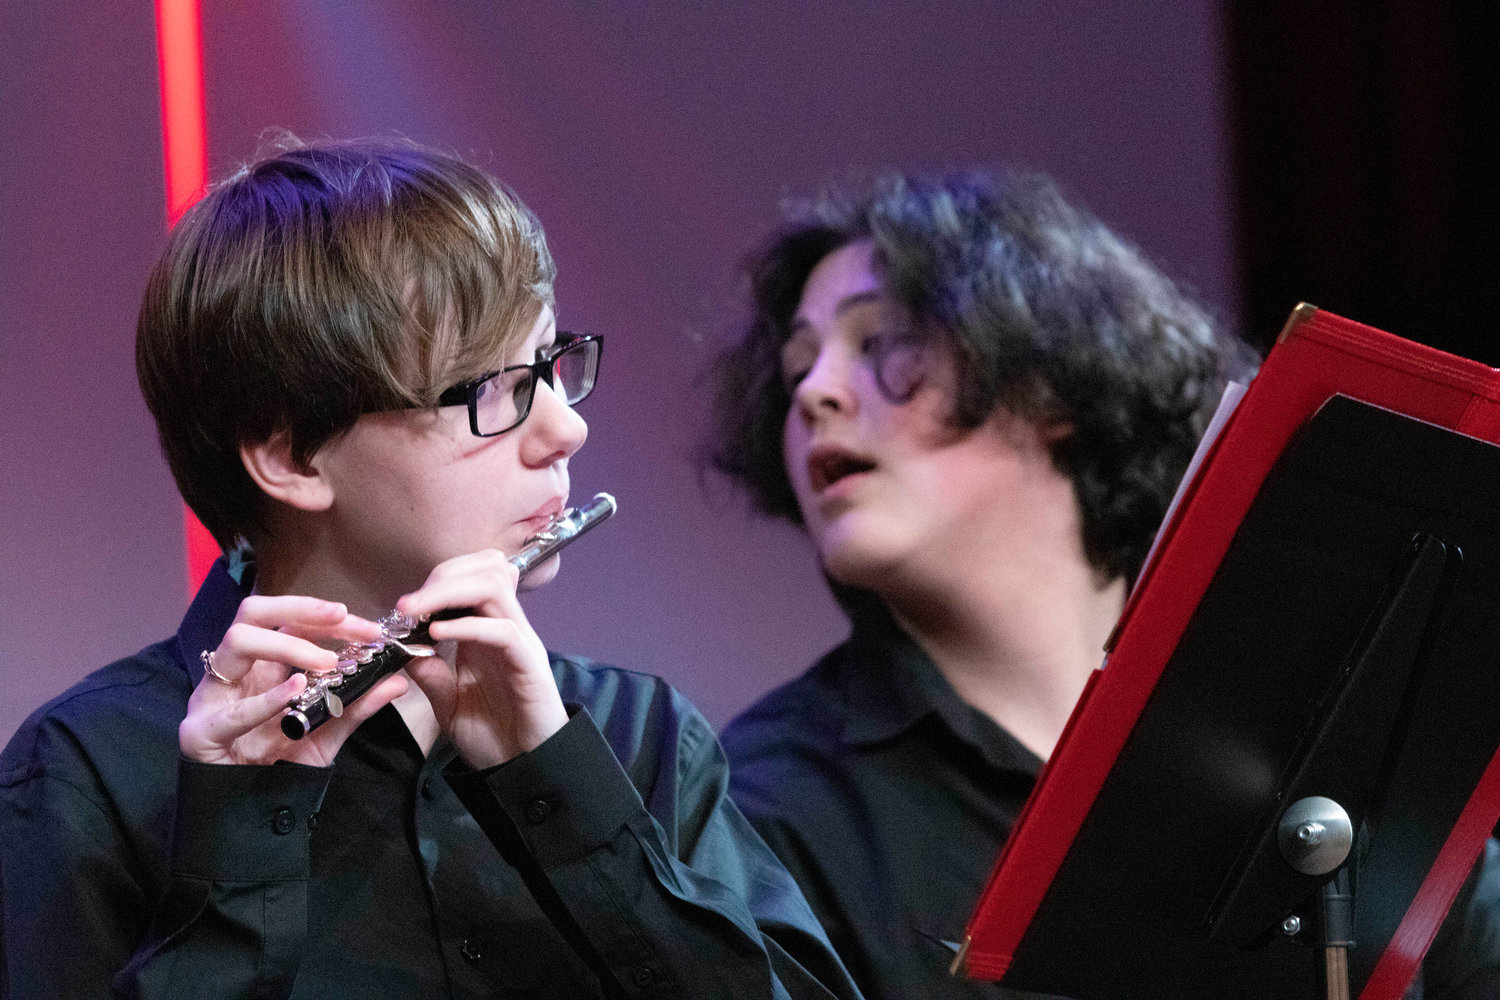 Jorden Pereira warms up on the flute as band mate Jake Rodrick (right) looks on